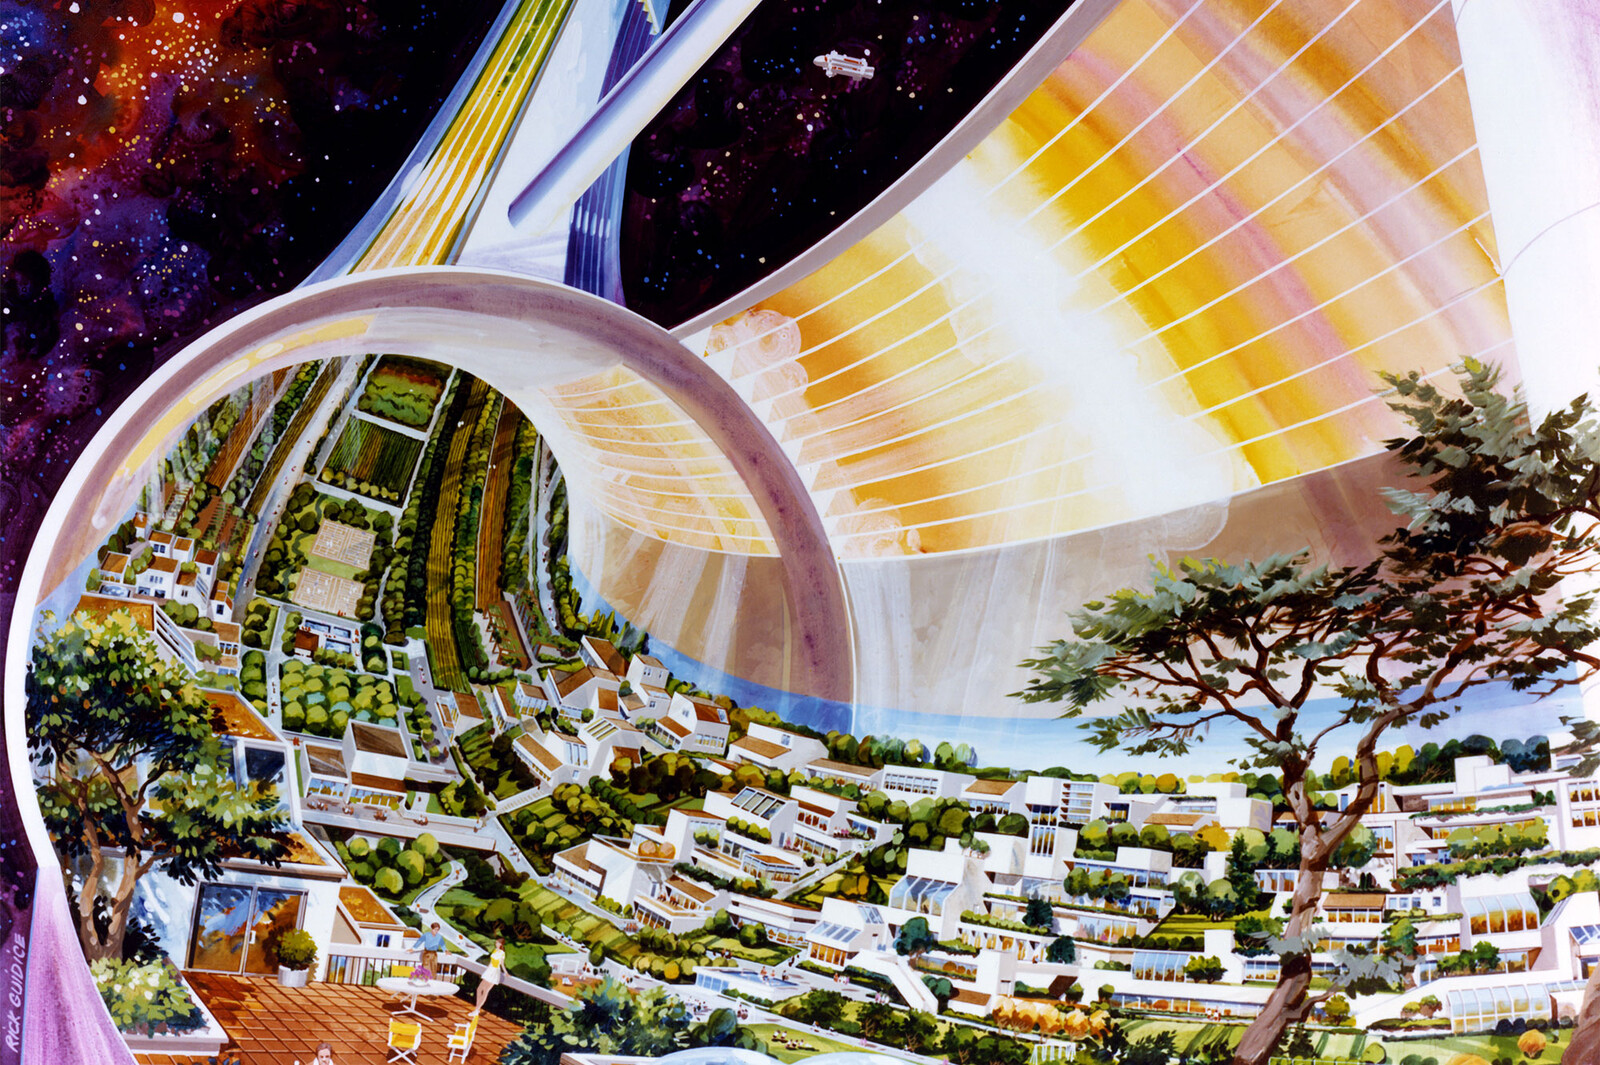 Review of space habitat designs for long term space explorations